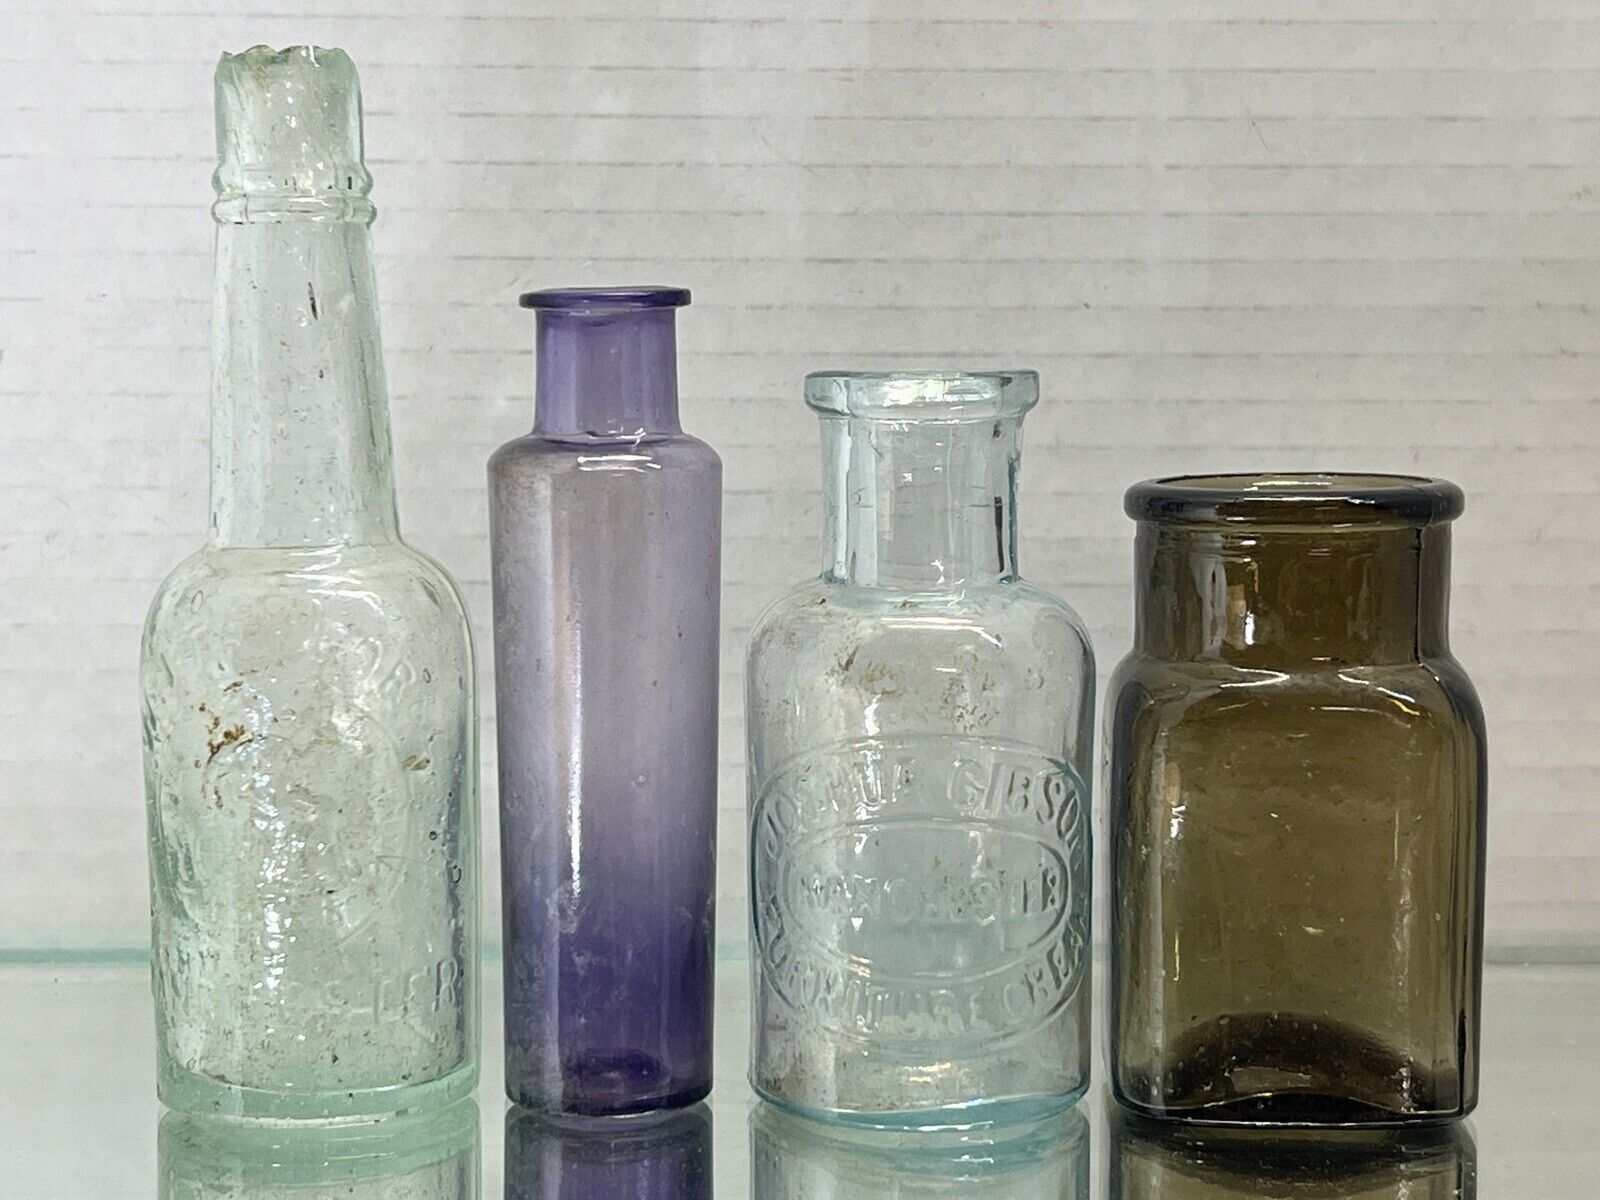 4 Early Misc Bottles 1 Sheared Tops Over 100 Years Old